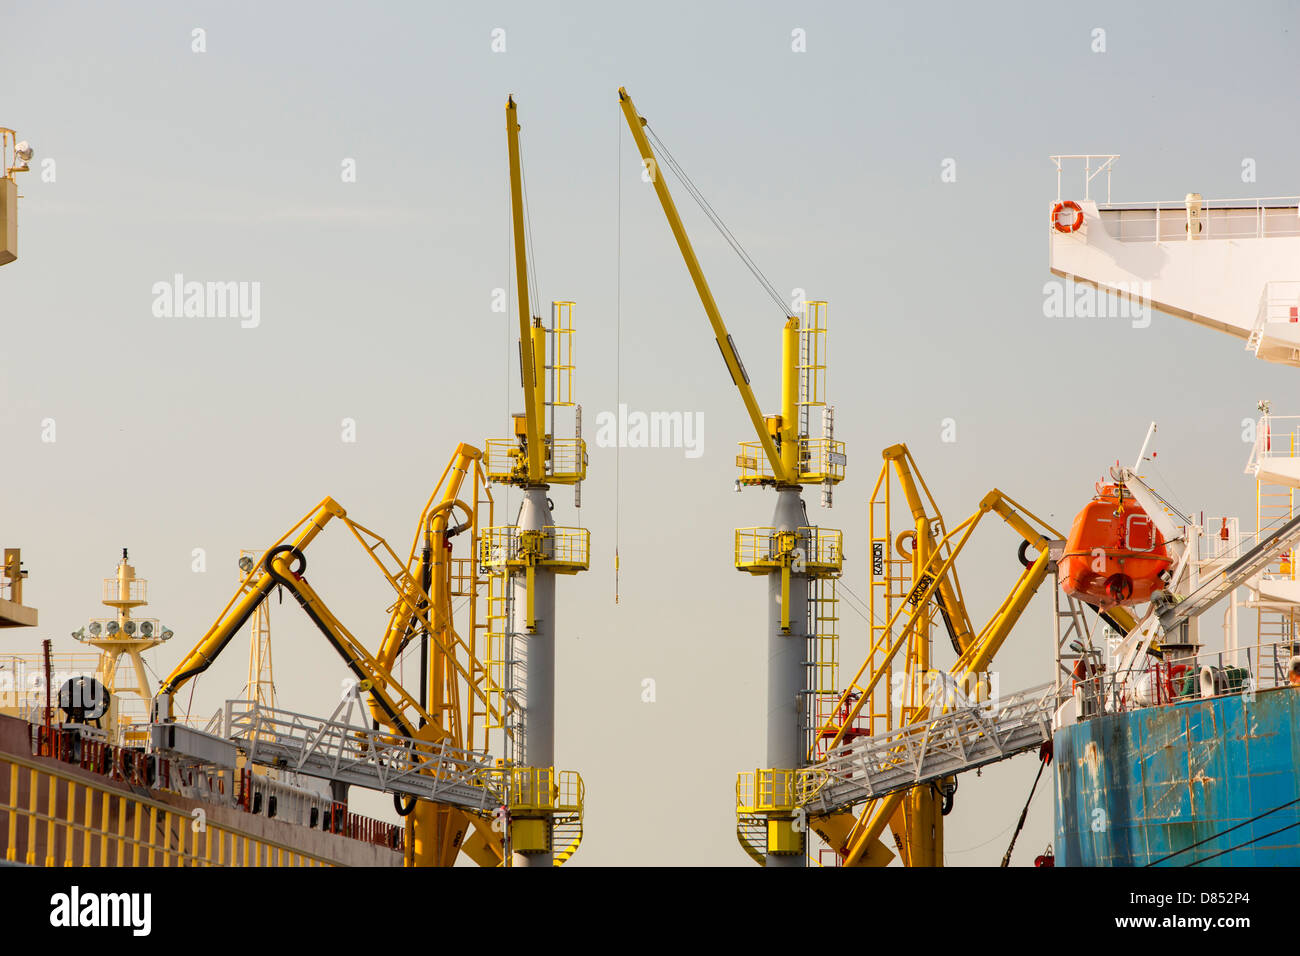 An oil tanker unloading at an oil terminal in Amsterdam, Netherlands. Stock Photo